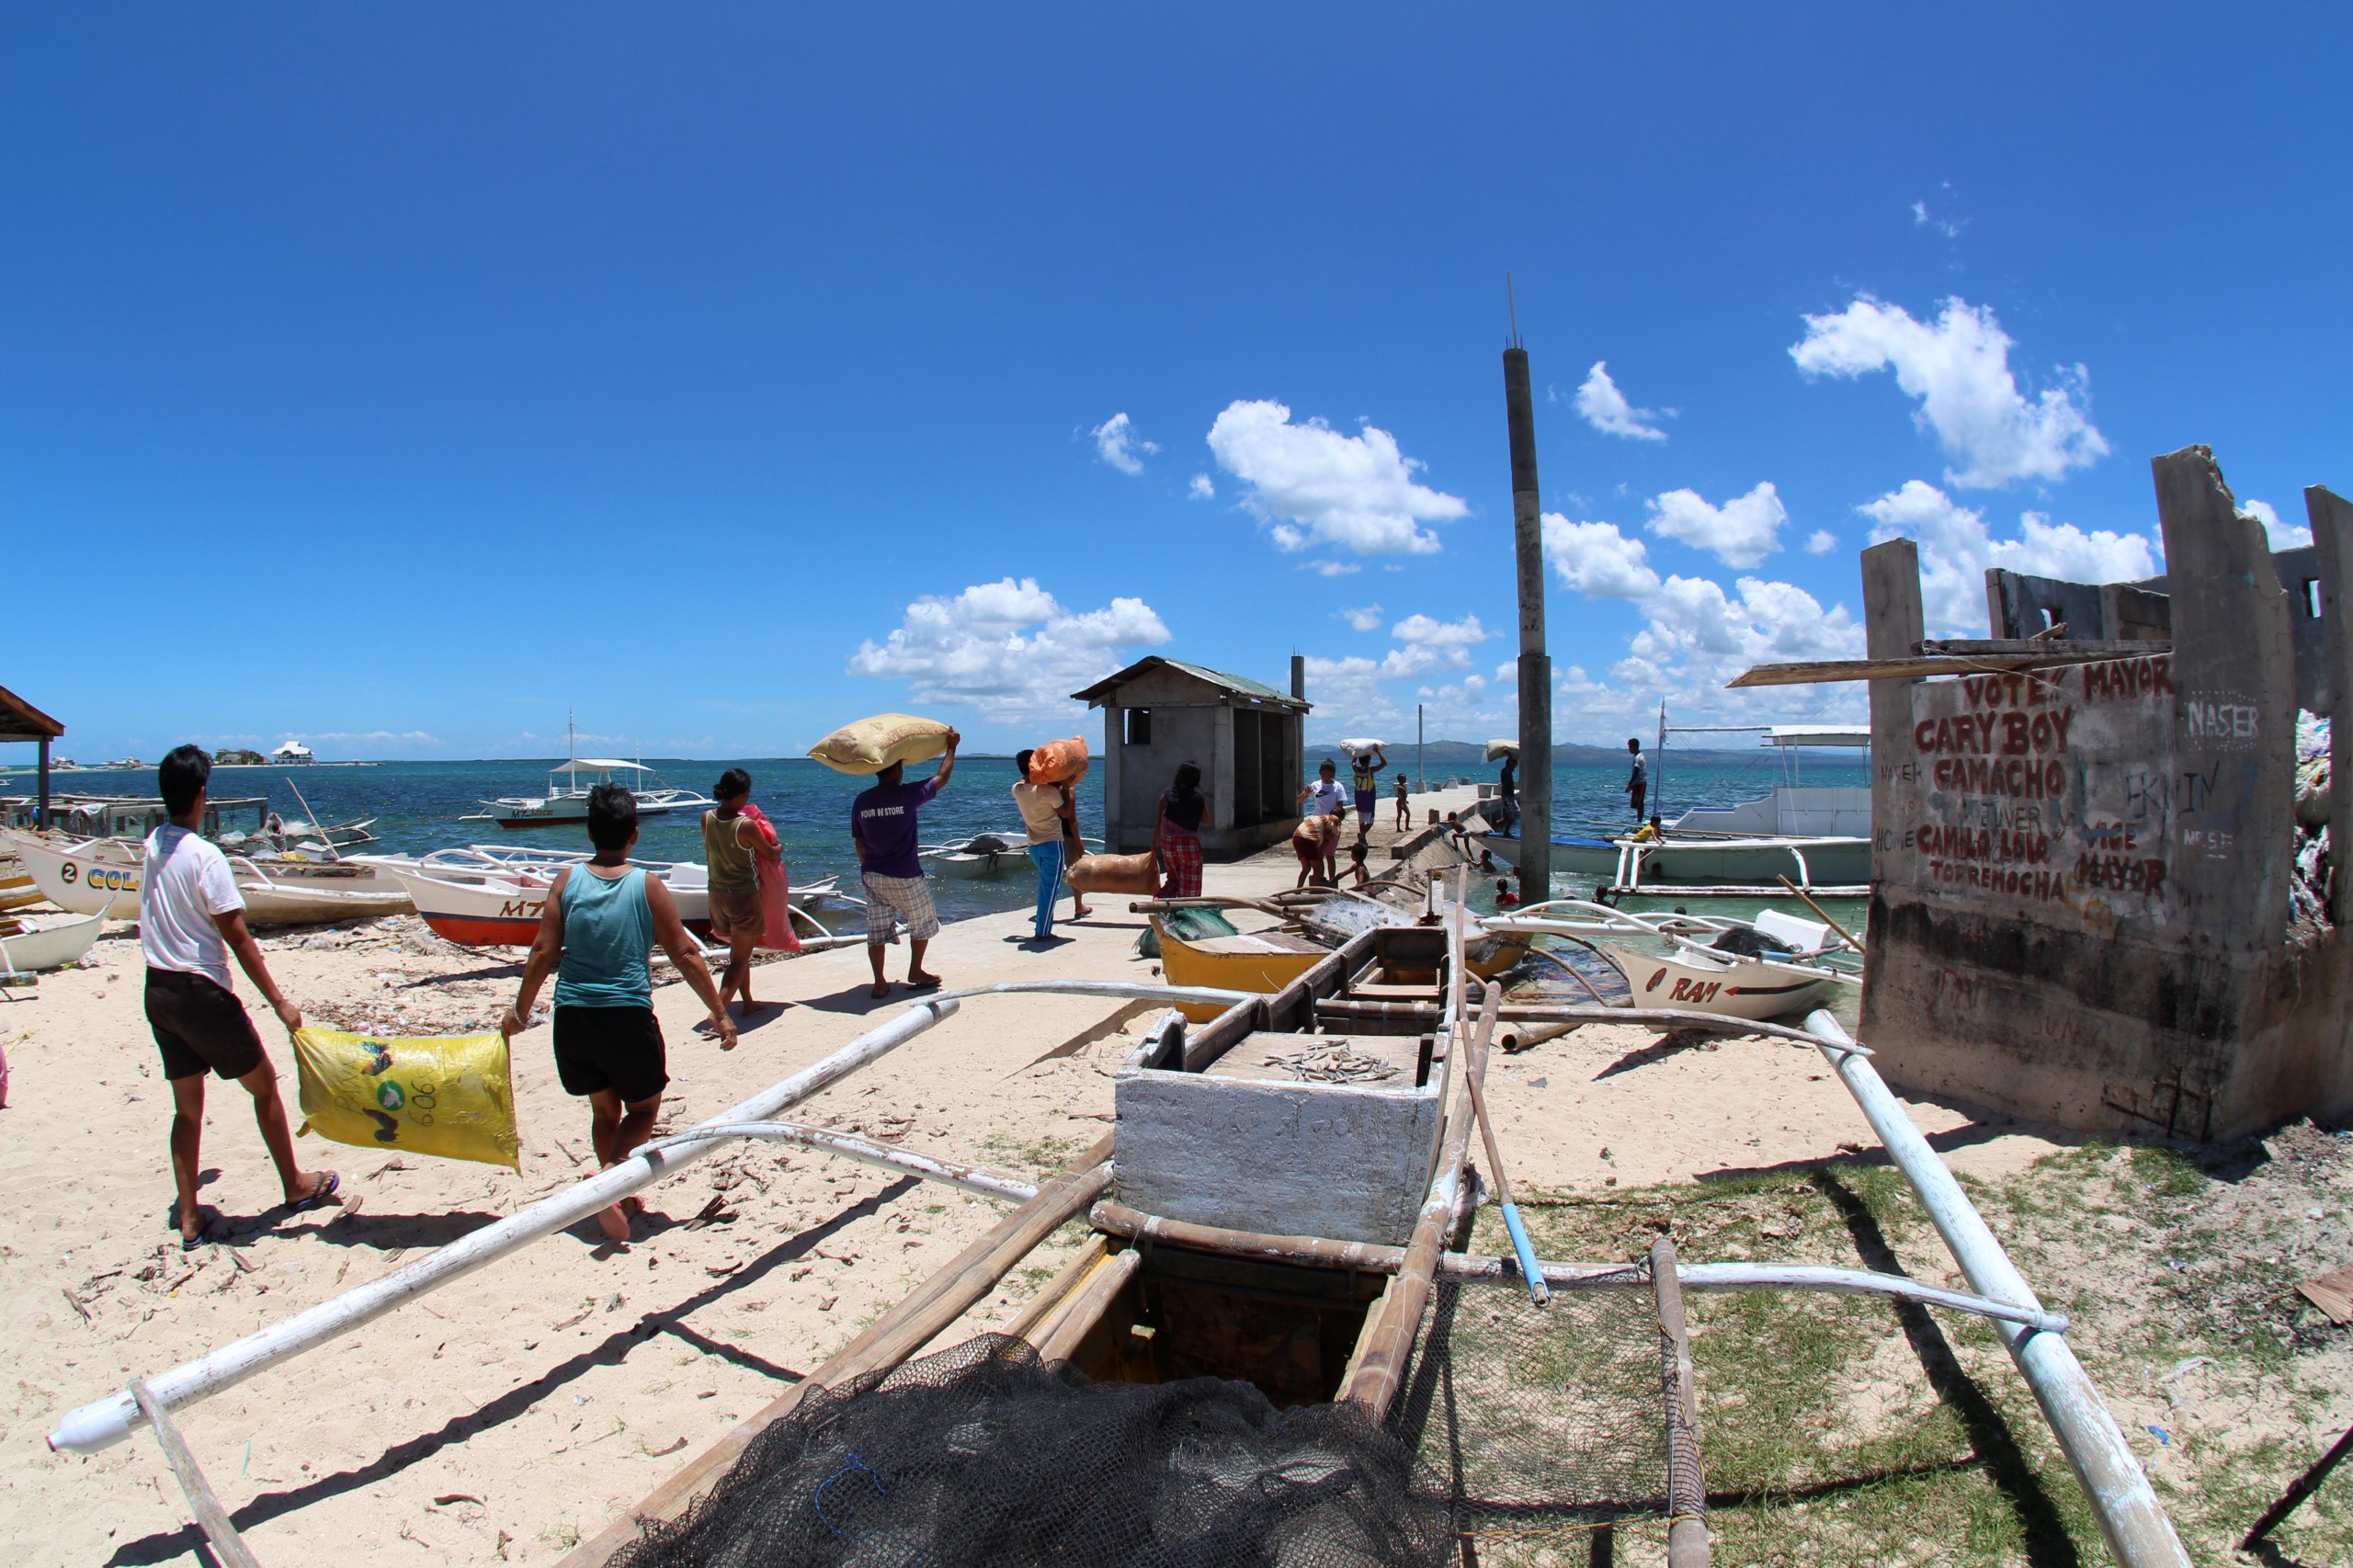 A group of people load sacks onto small boats at a beachside dock.